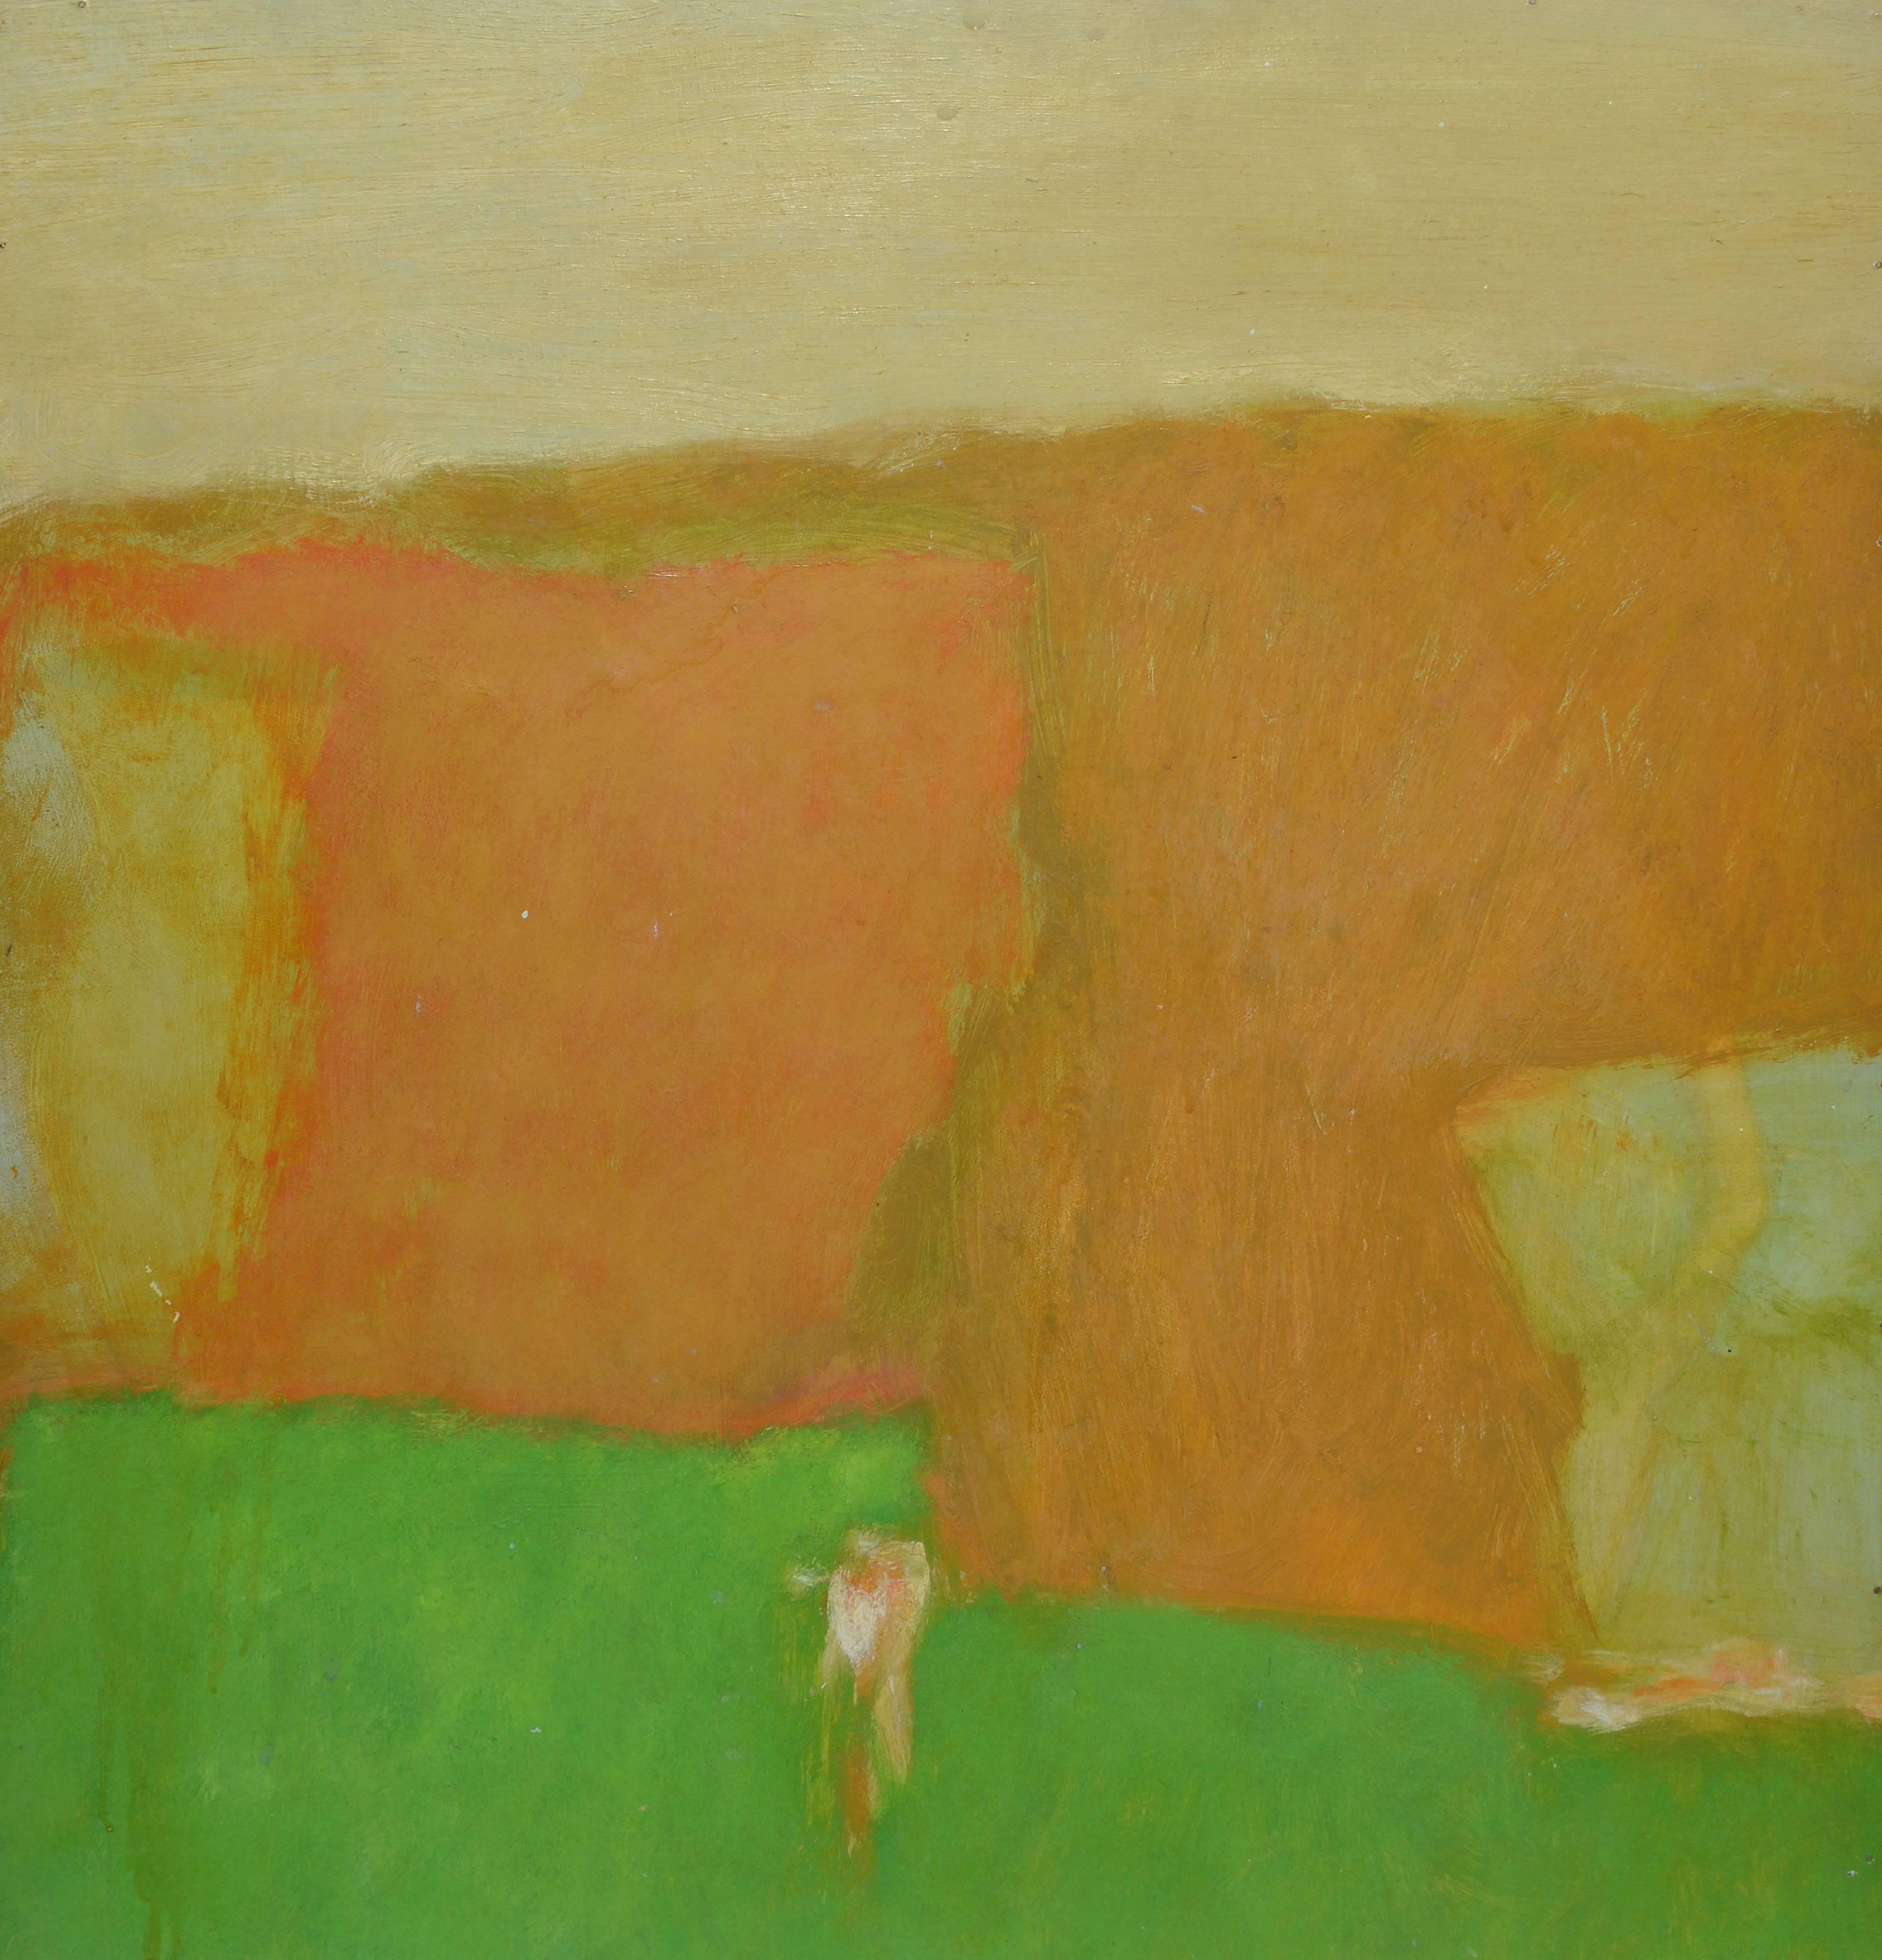 Abstract painting of a  landscape with a figure.  Oil on board, circa 1963.  Signed illegibly lower right.  Displayed in a wood frame.  Image size, 20"L x 24"H, overall 20.5"L x 24.5"H